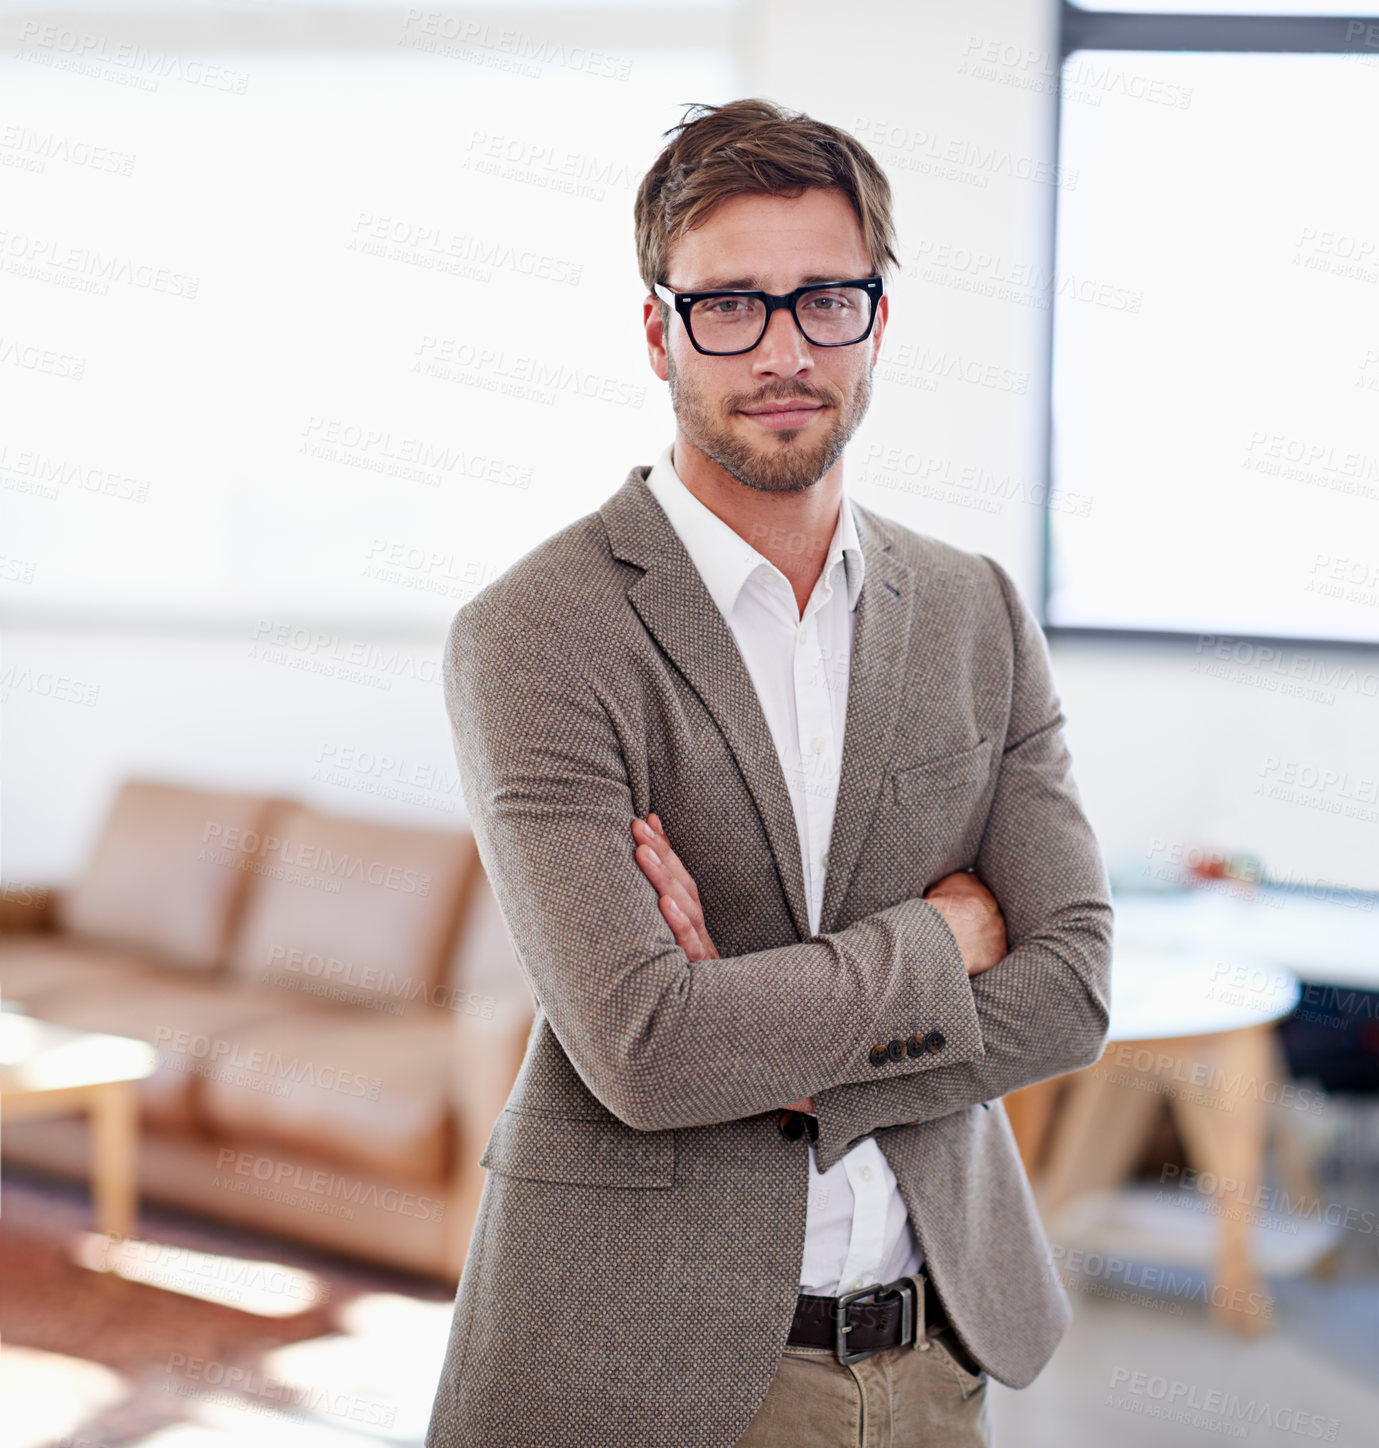 Buy stock photo Portrait of a young man standing in an office